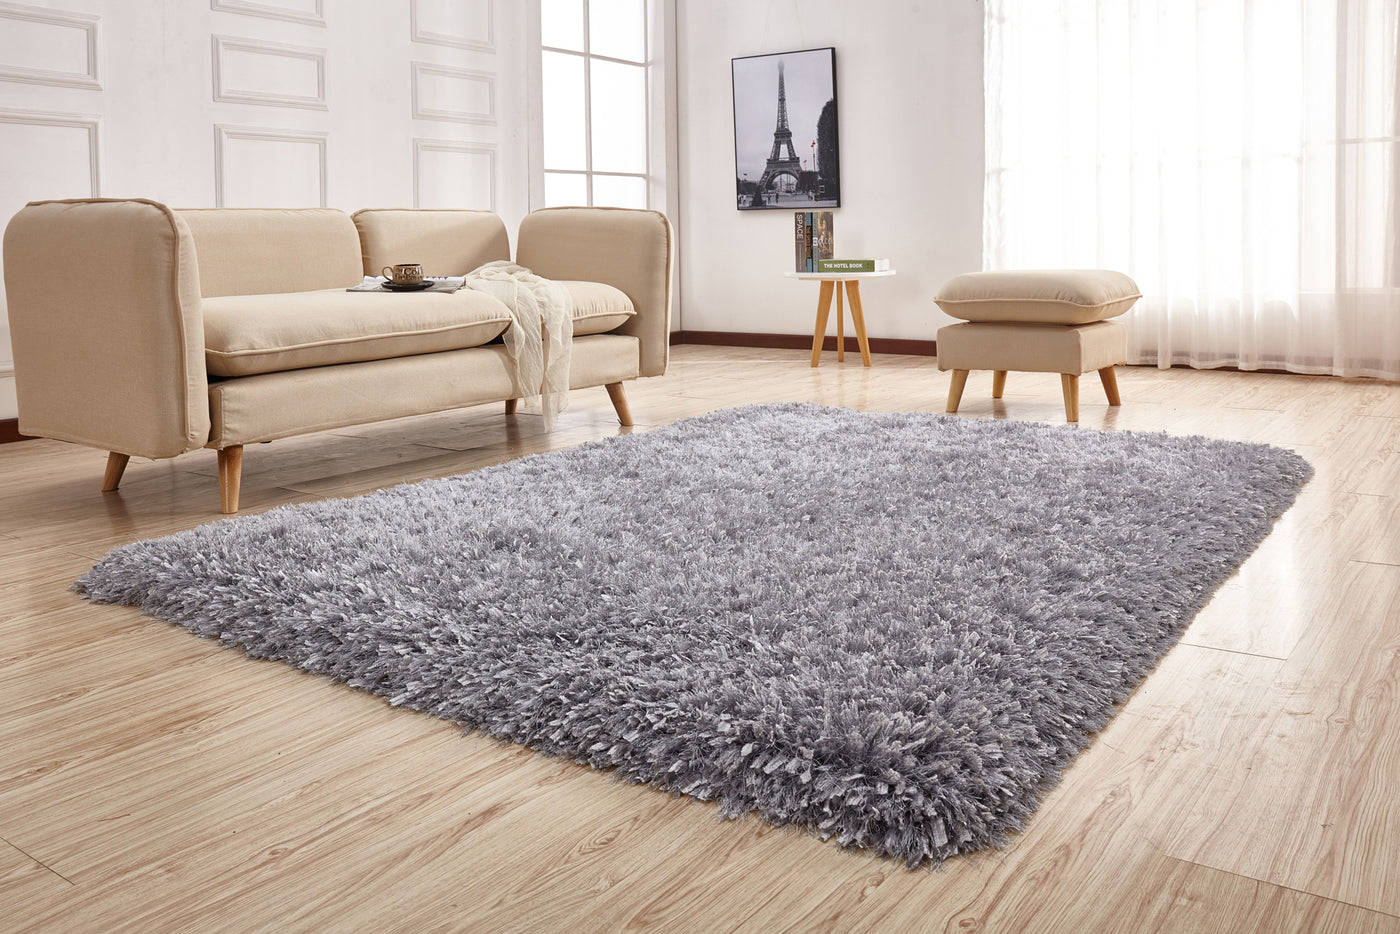 Modern Multi-textural Appx. 3" High Pile Crystal Shag Area Rug by Rug Factory Plus - Rug Factory Plus